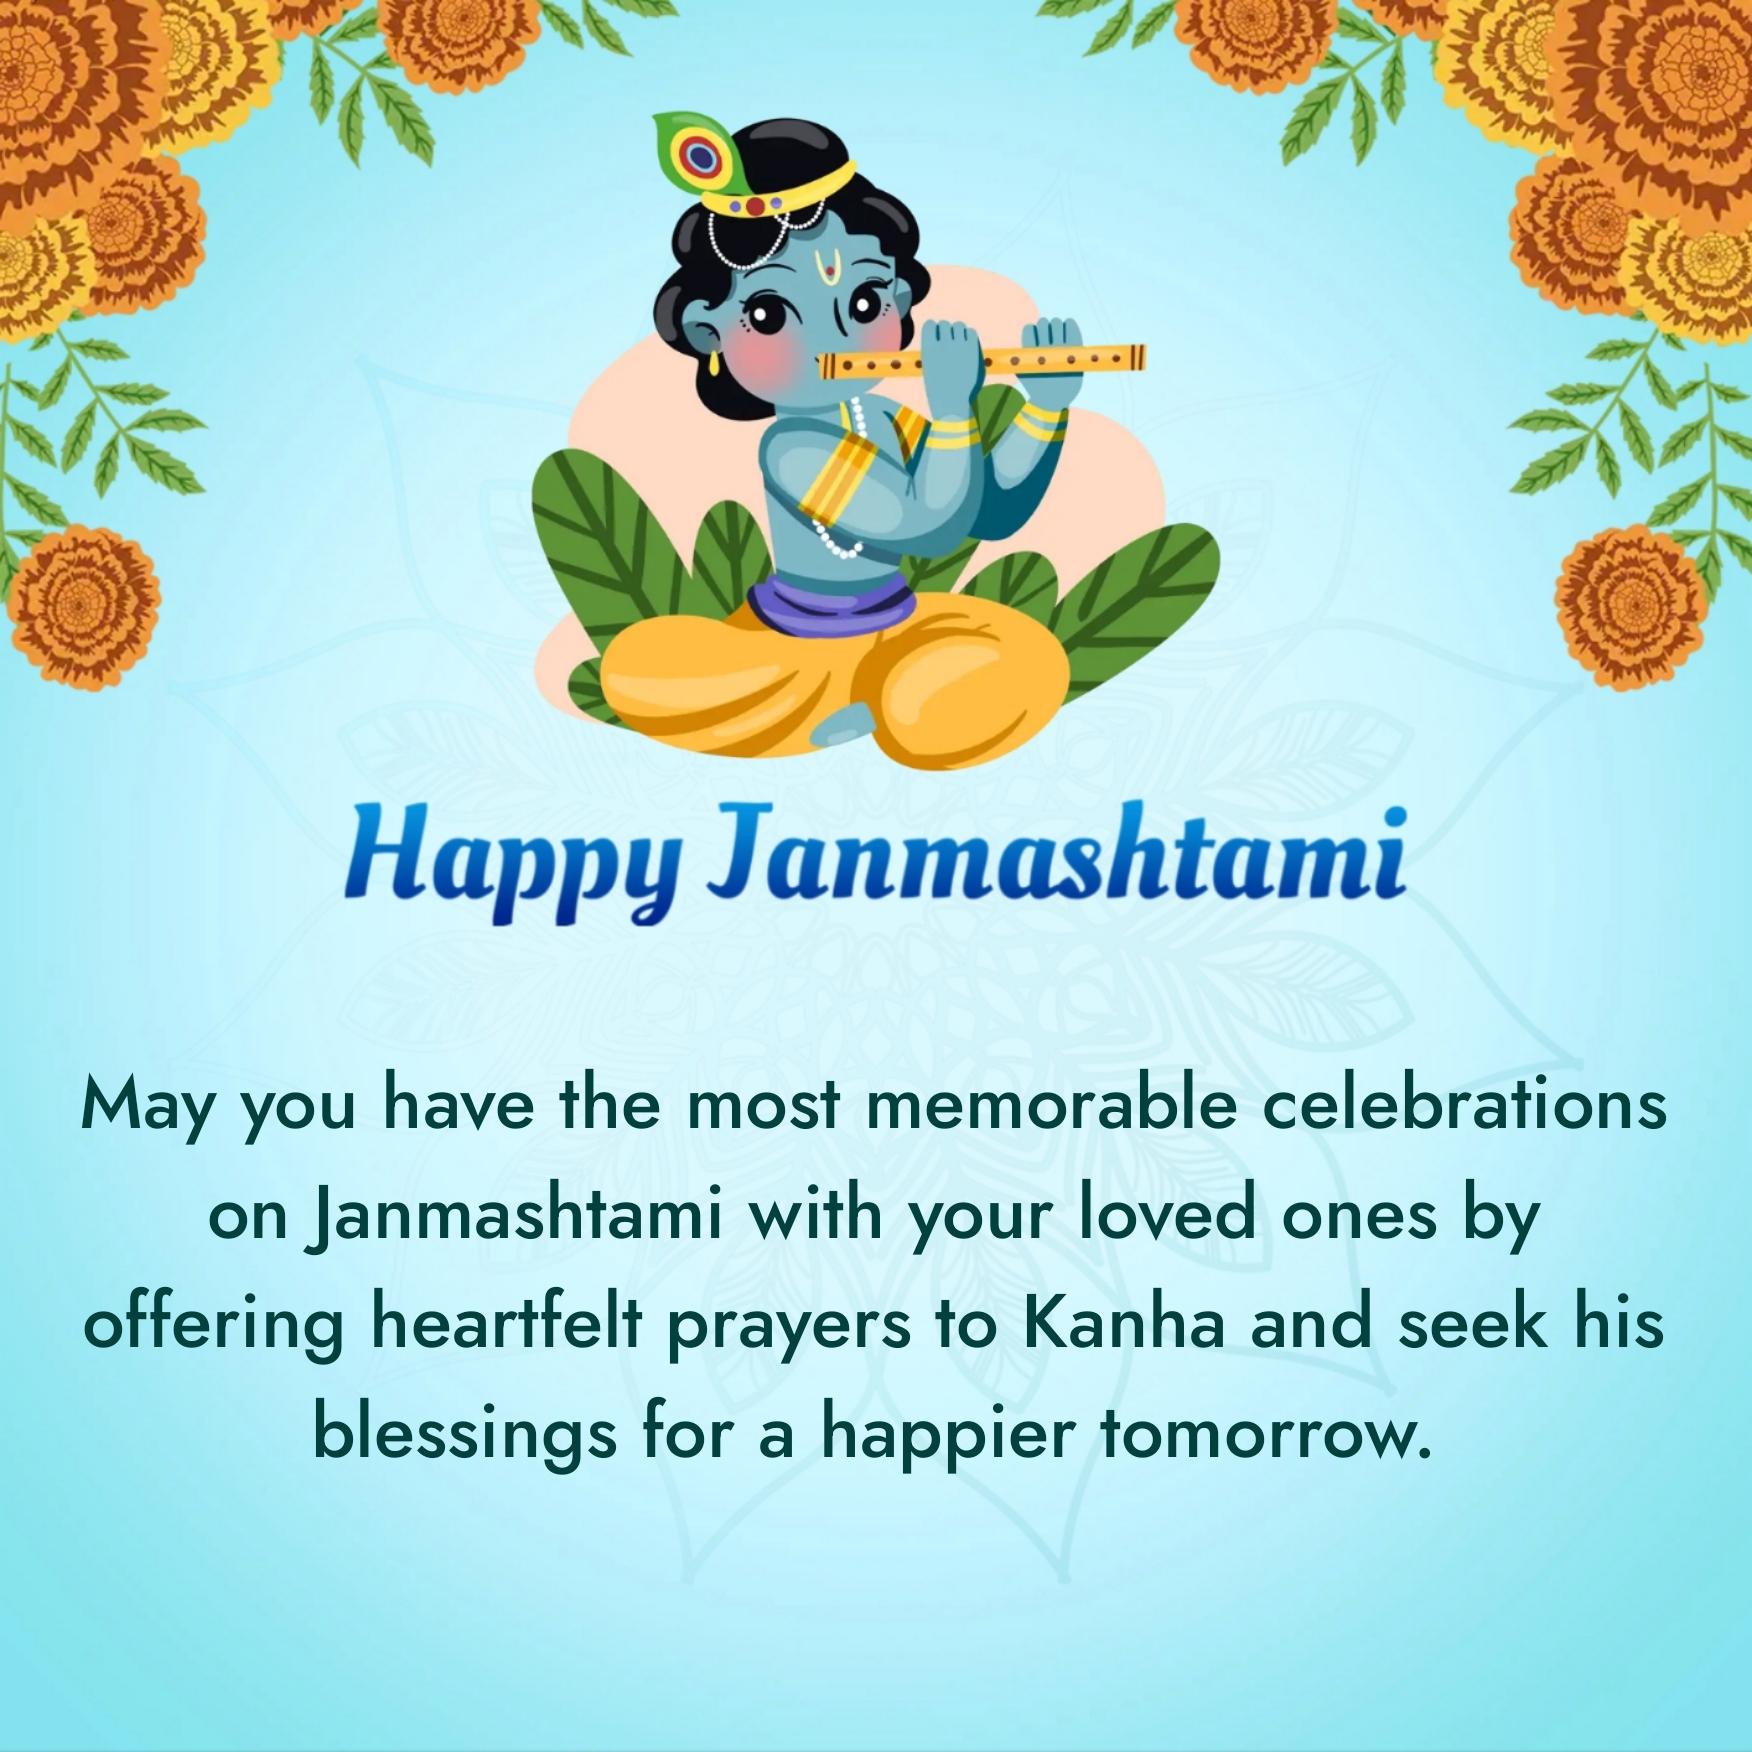 May you have the most memorable celebrations on Janmashtami